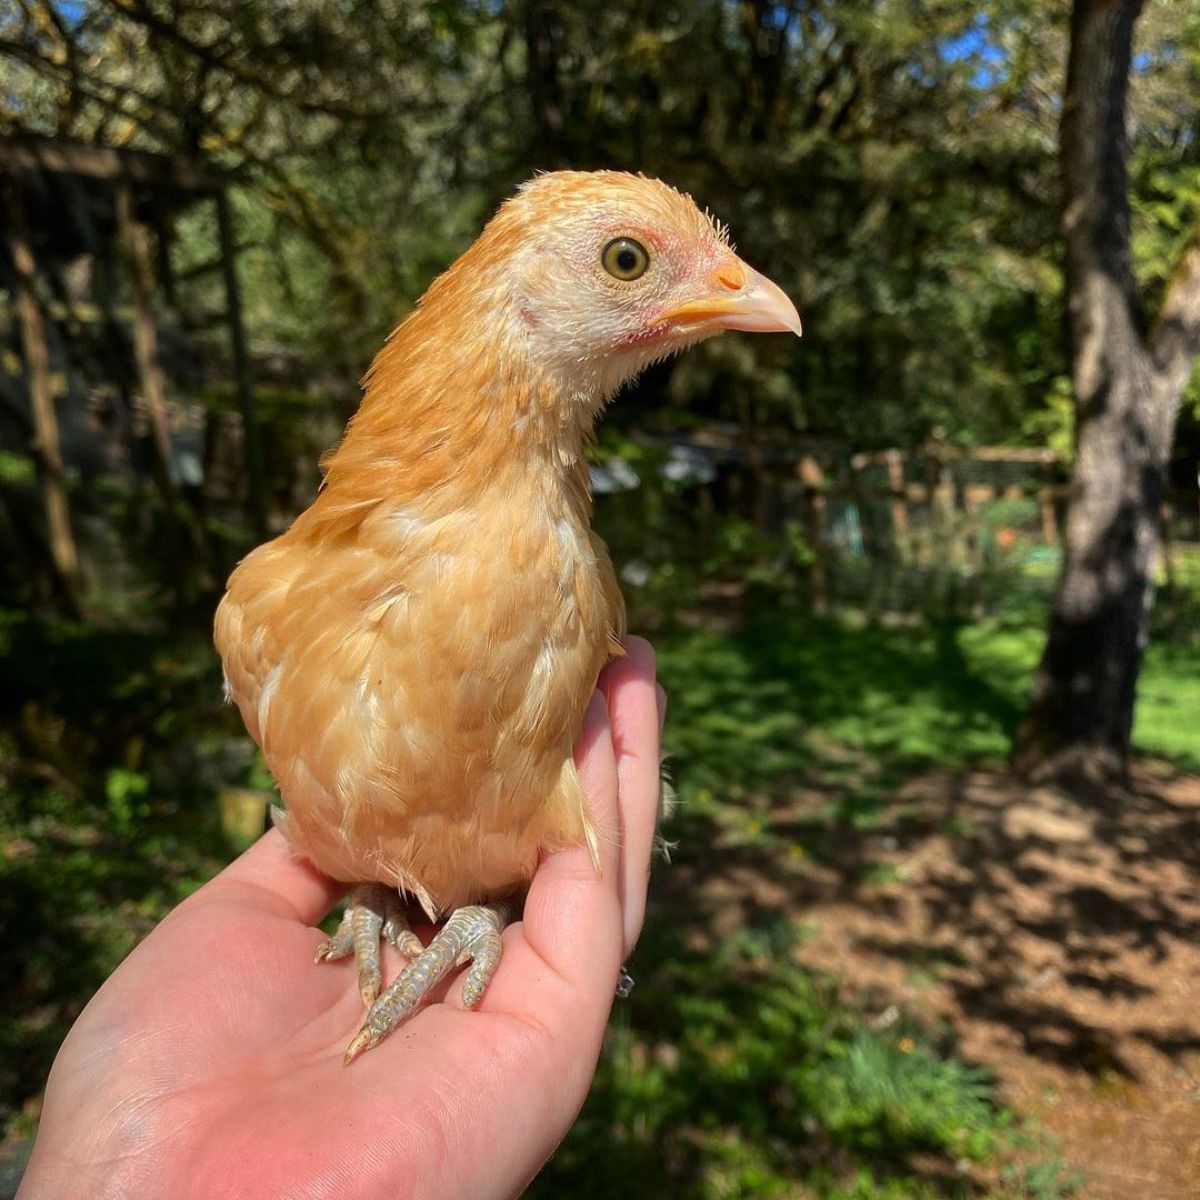 An adorable Nankin pullet perched on the owner's hand.